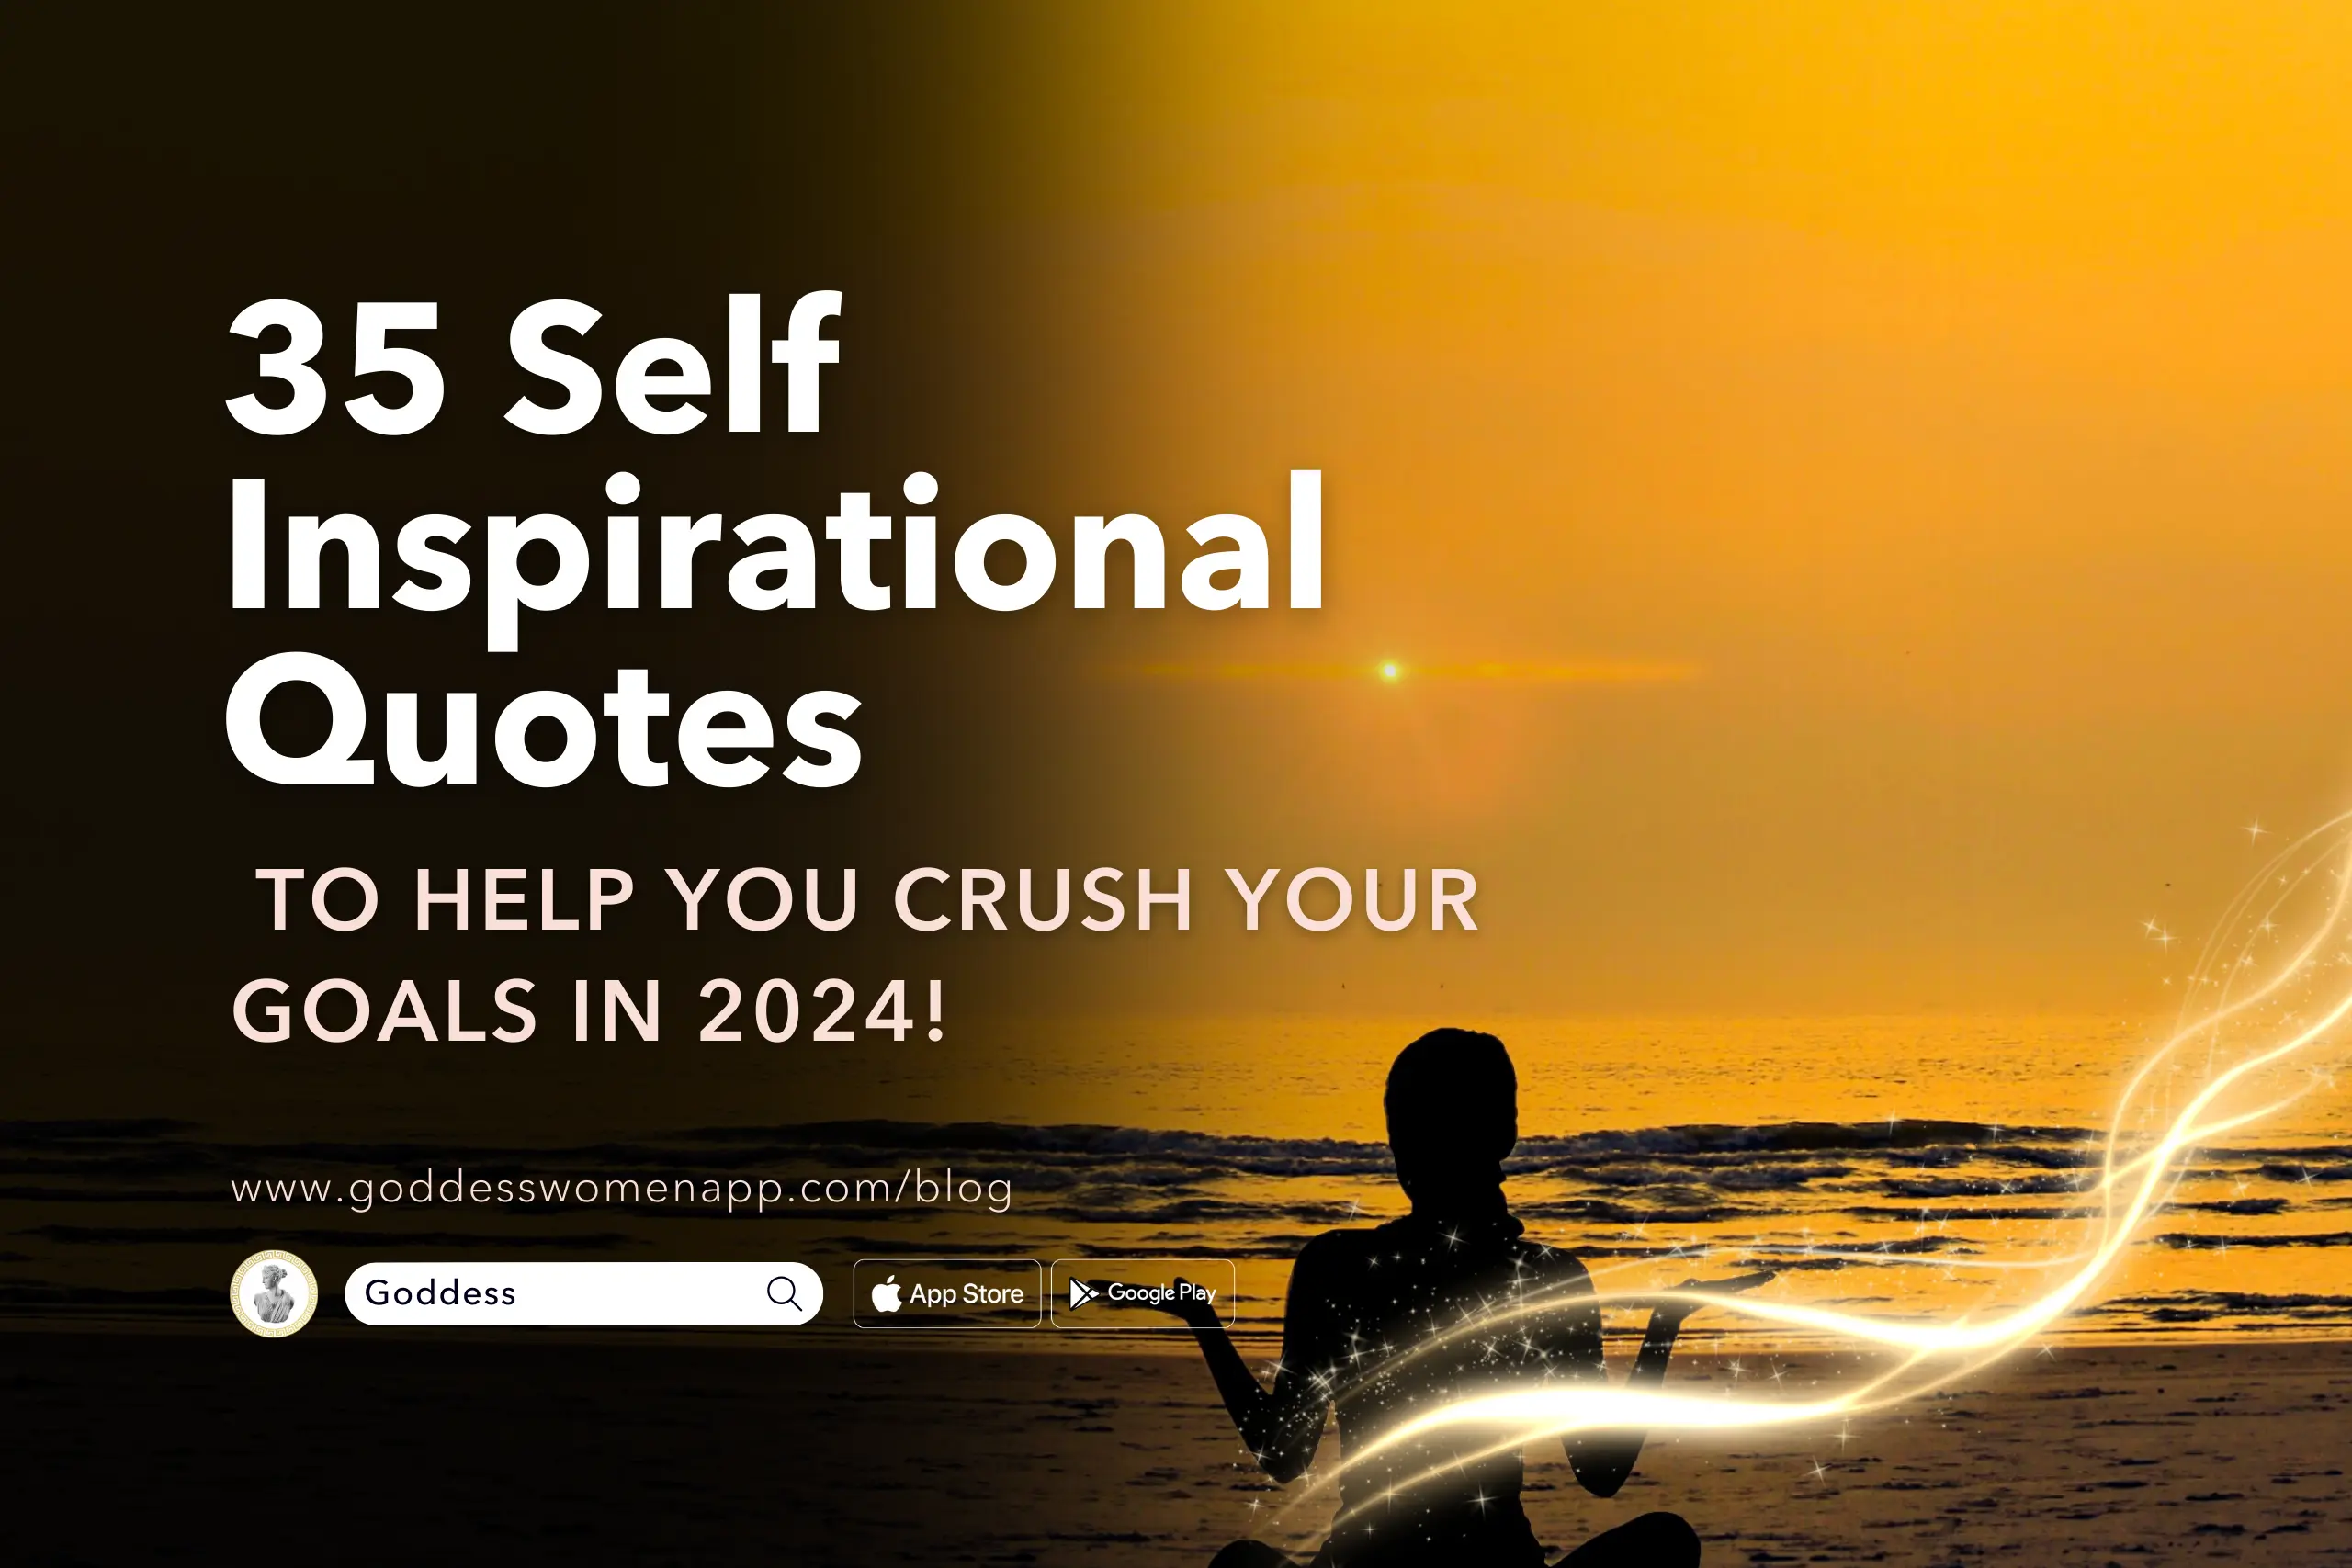 35 Self Inspirational Quotes to Help You Crush Your Goals in 2024!